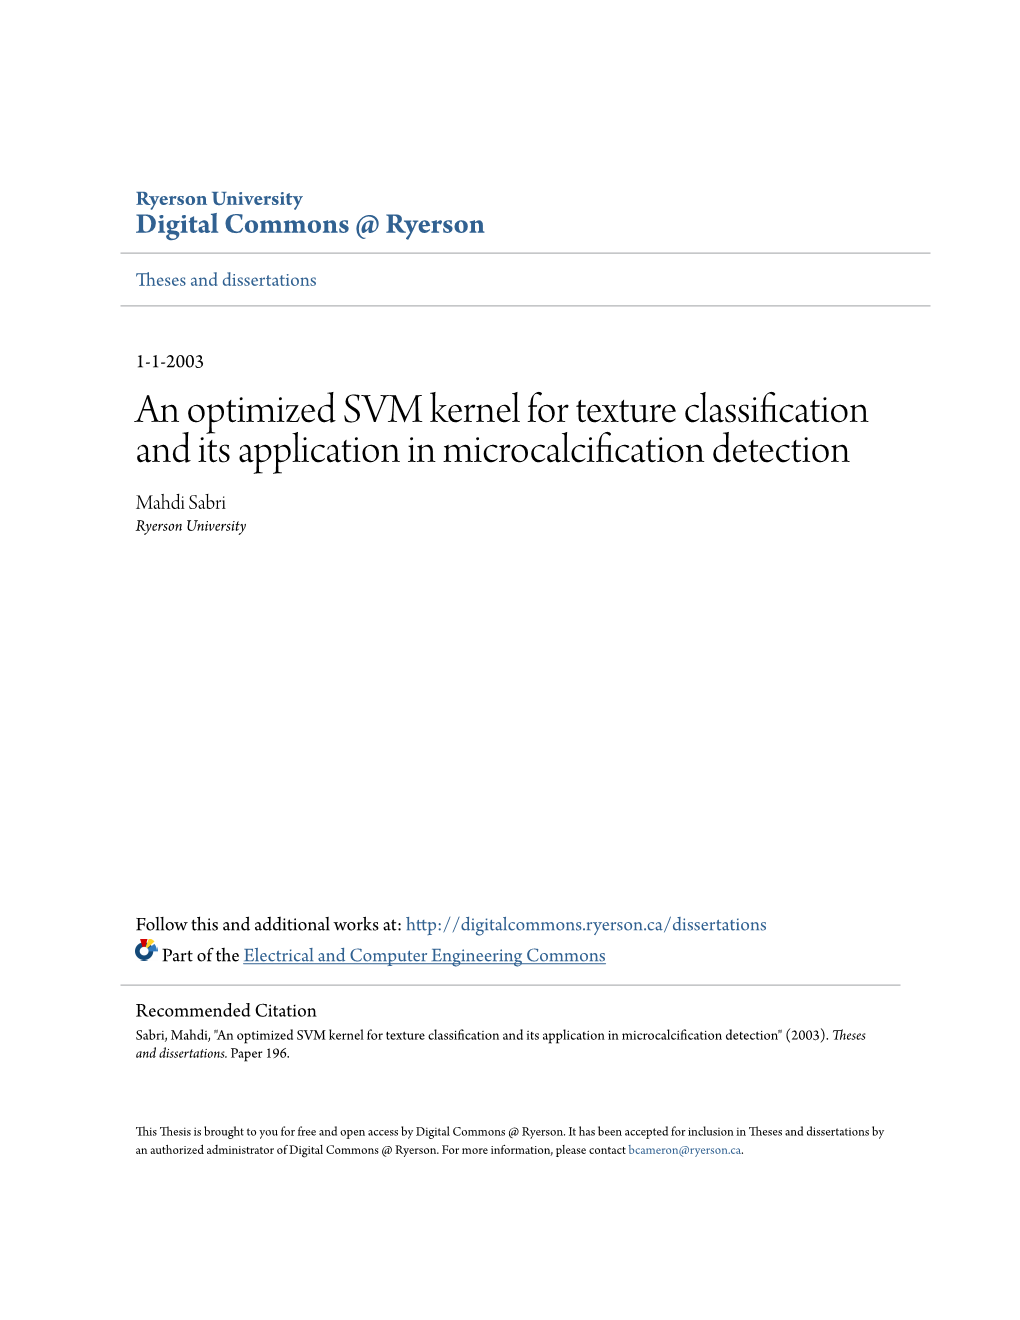 An Optimized SVM Kernel for Texture Classification and Its Application in Microcalcification Detection Mahdi Sabri Ryerson University